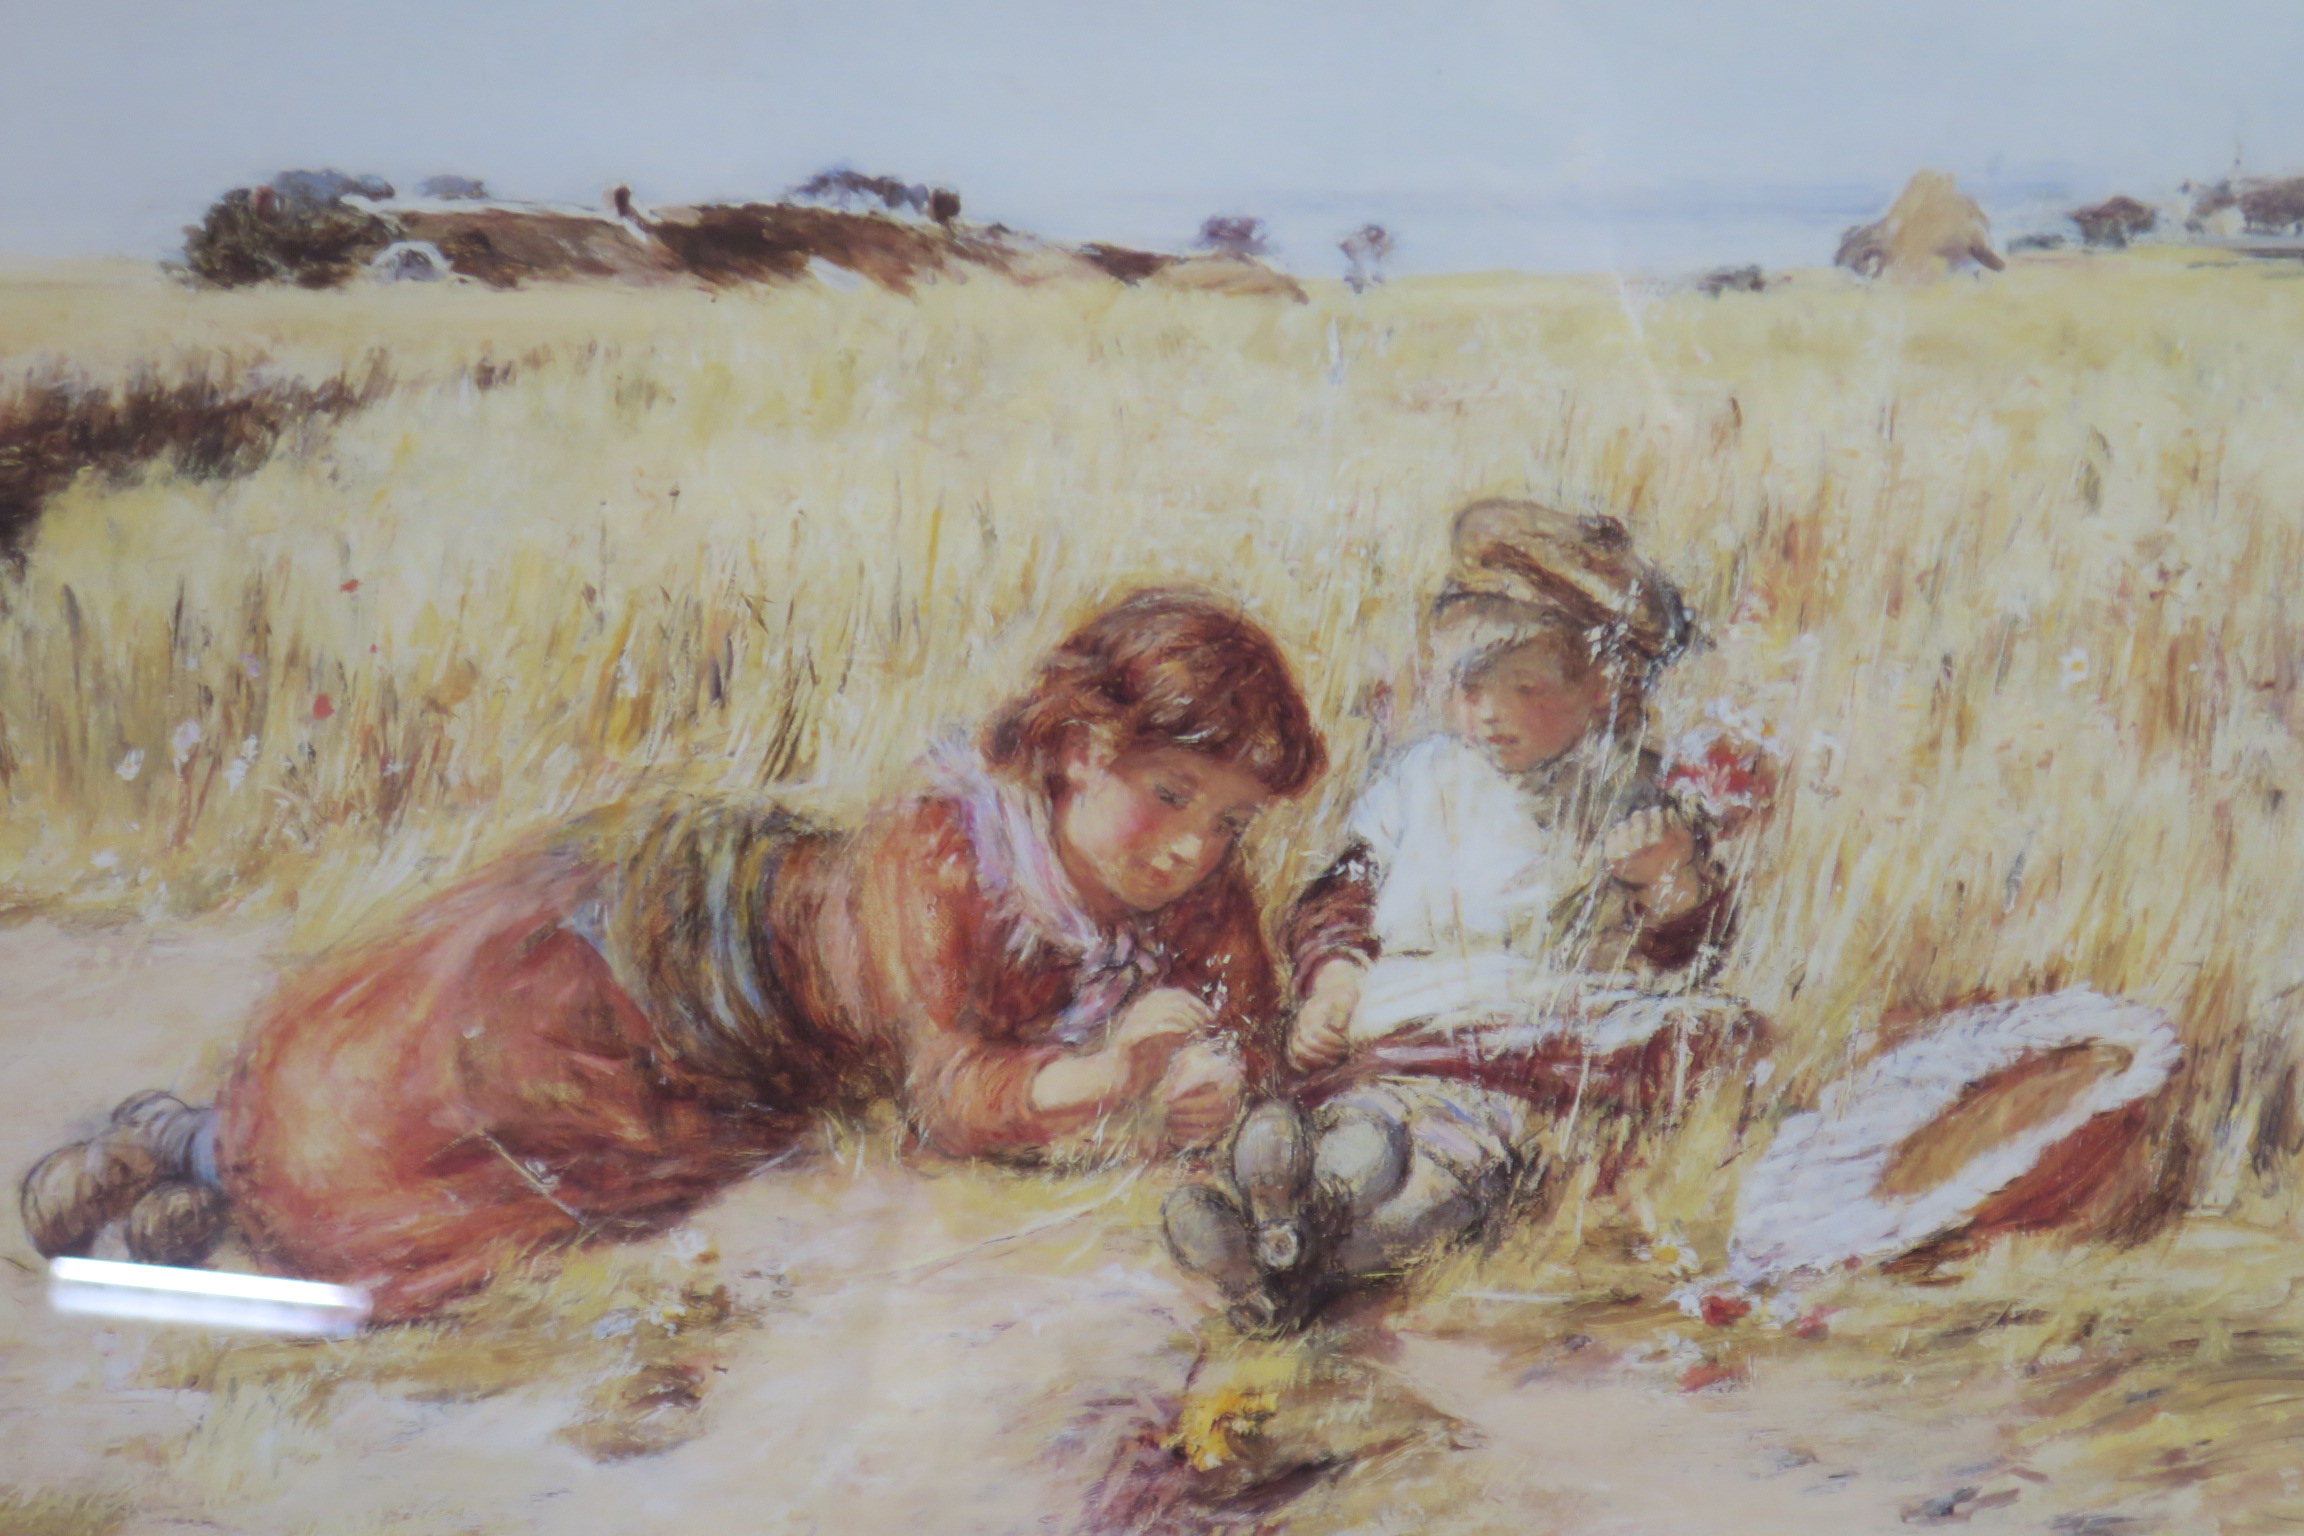 W McTAGGART CORN IN THE EAR A Colour Print Signed Lower Right 40cm (h) x 54cm (w)